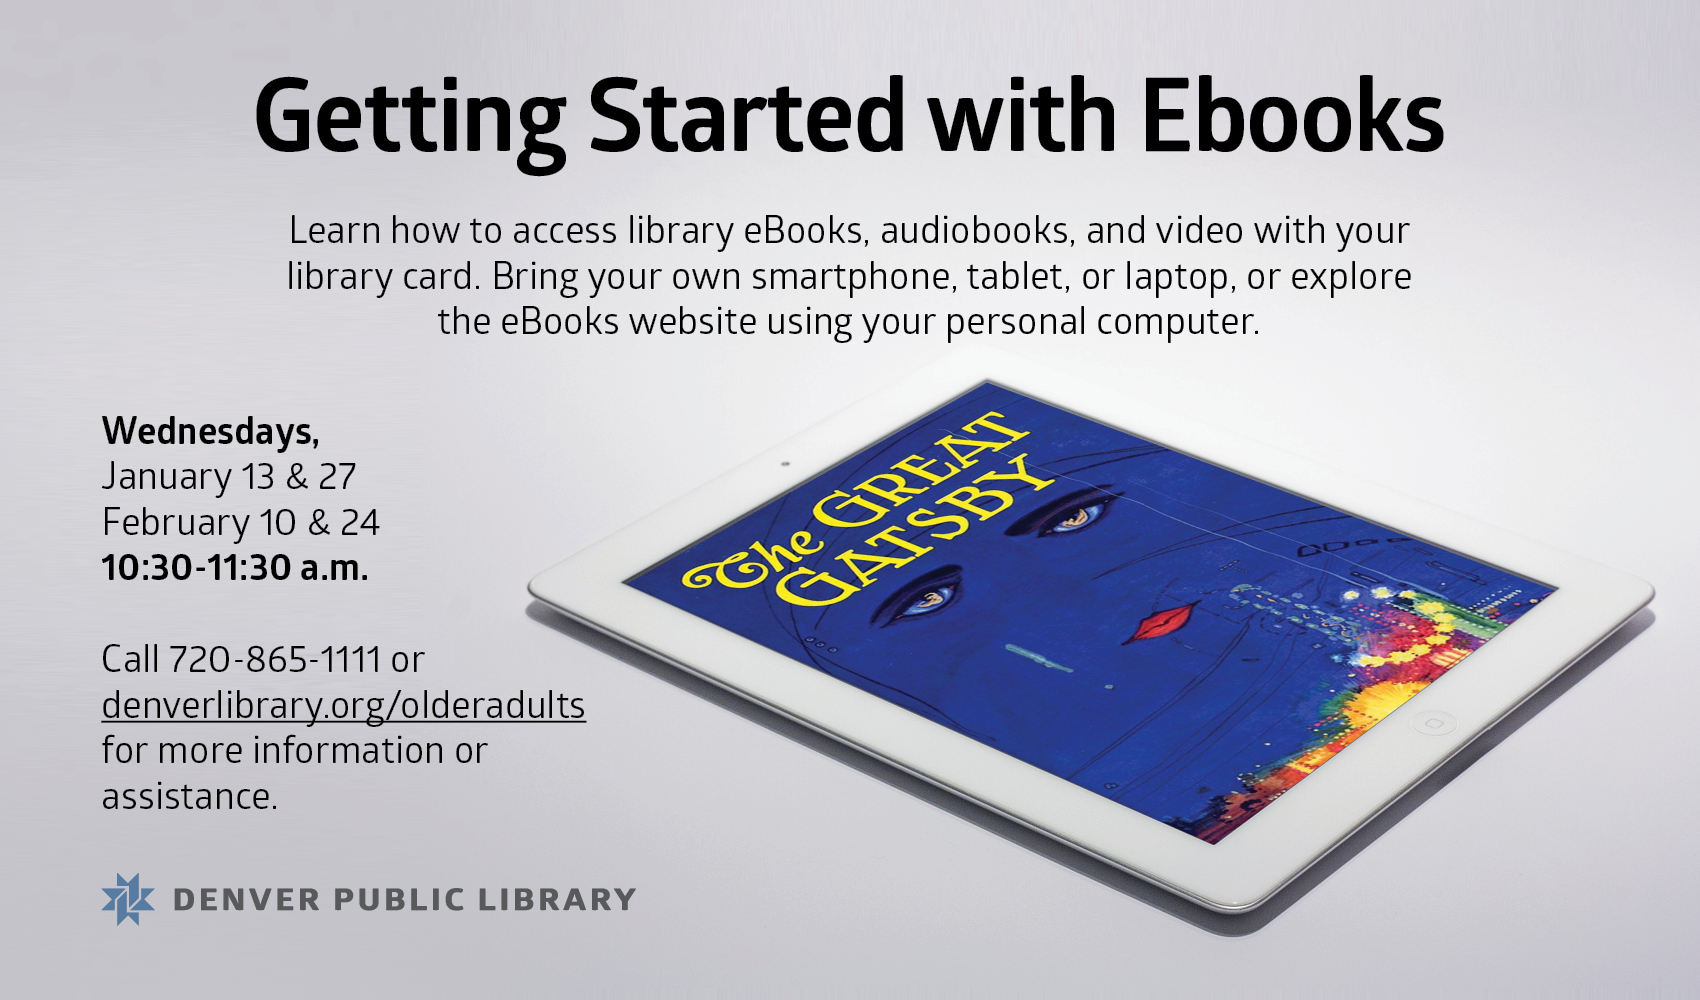 Added flyer of Getting Started with eBooks